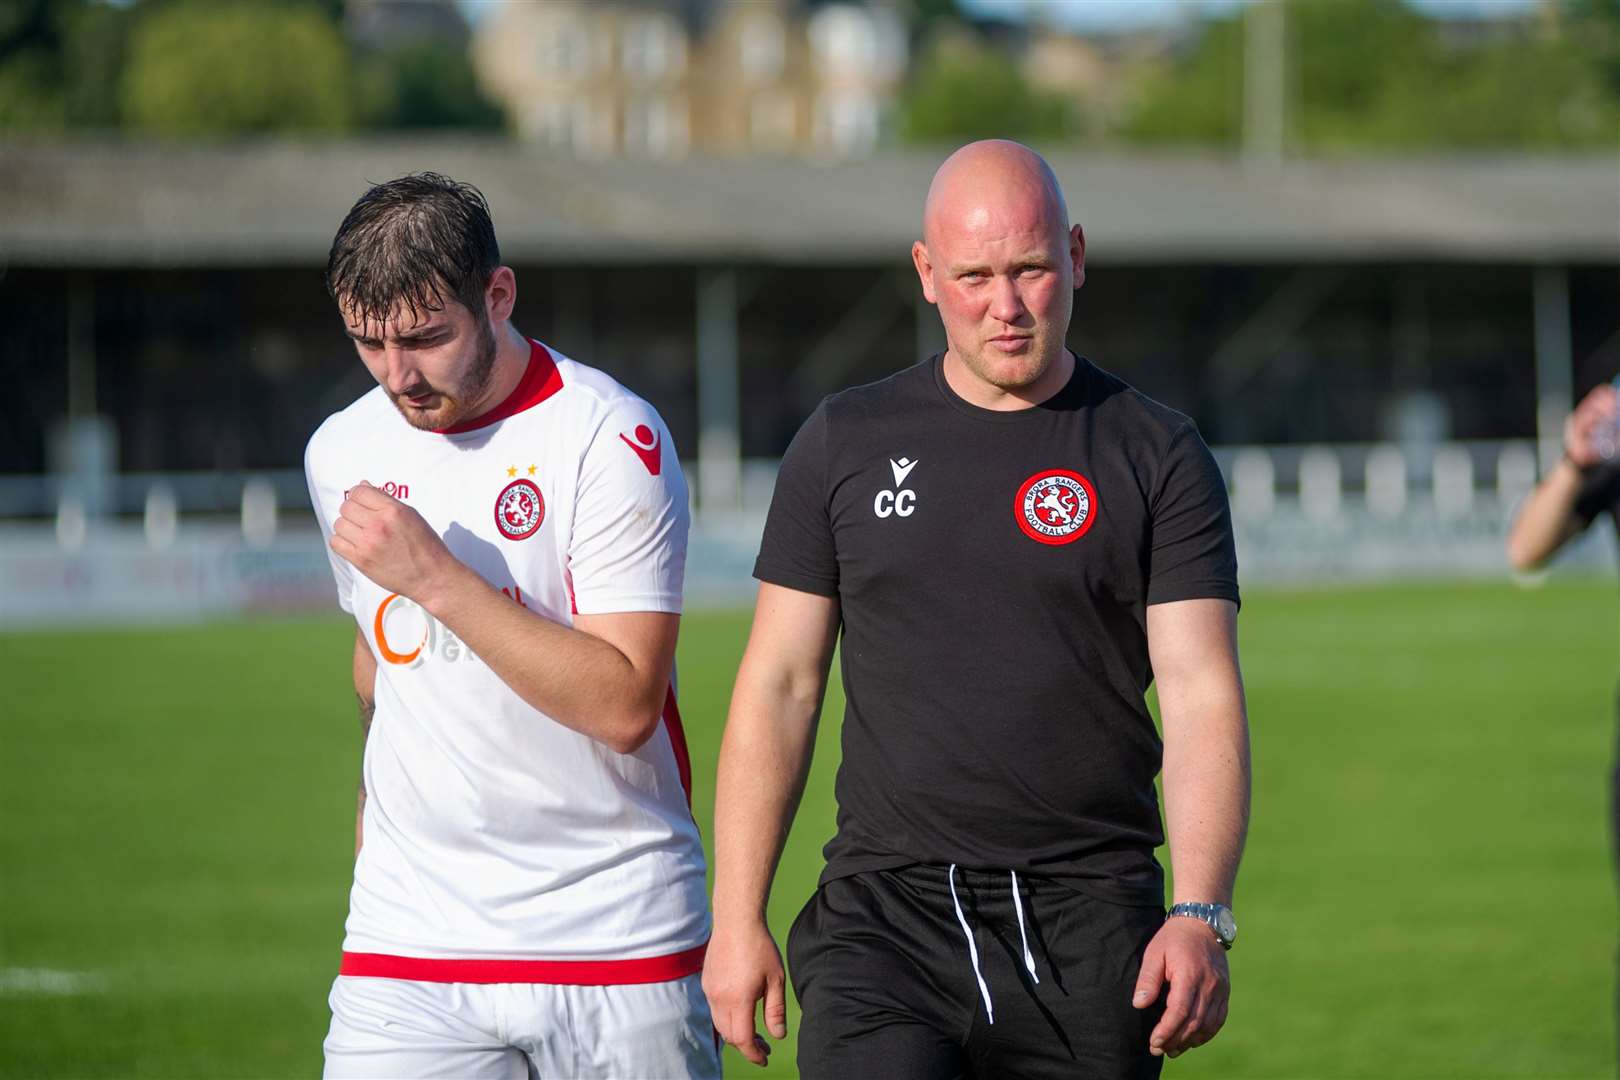 Brora Rangers won't be travelling to Camelon on Wednesday.